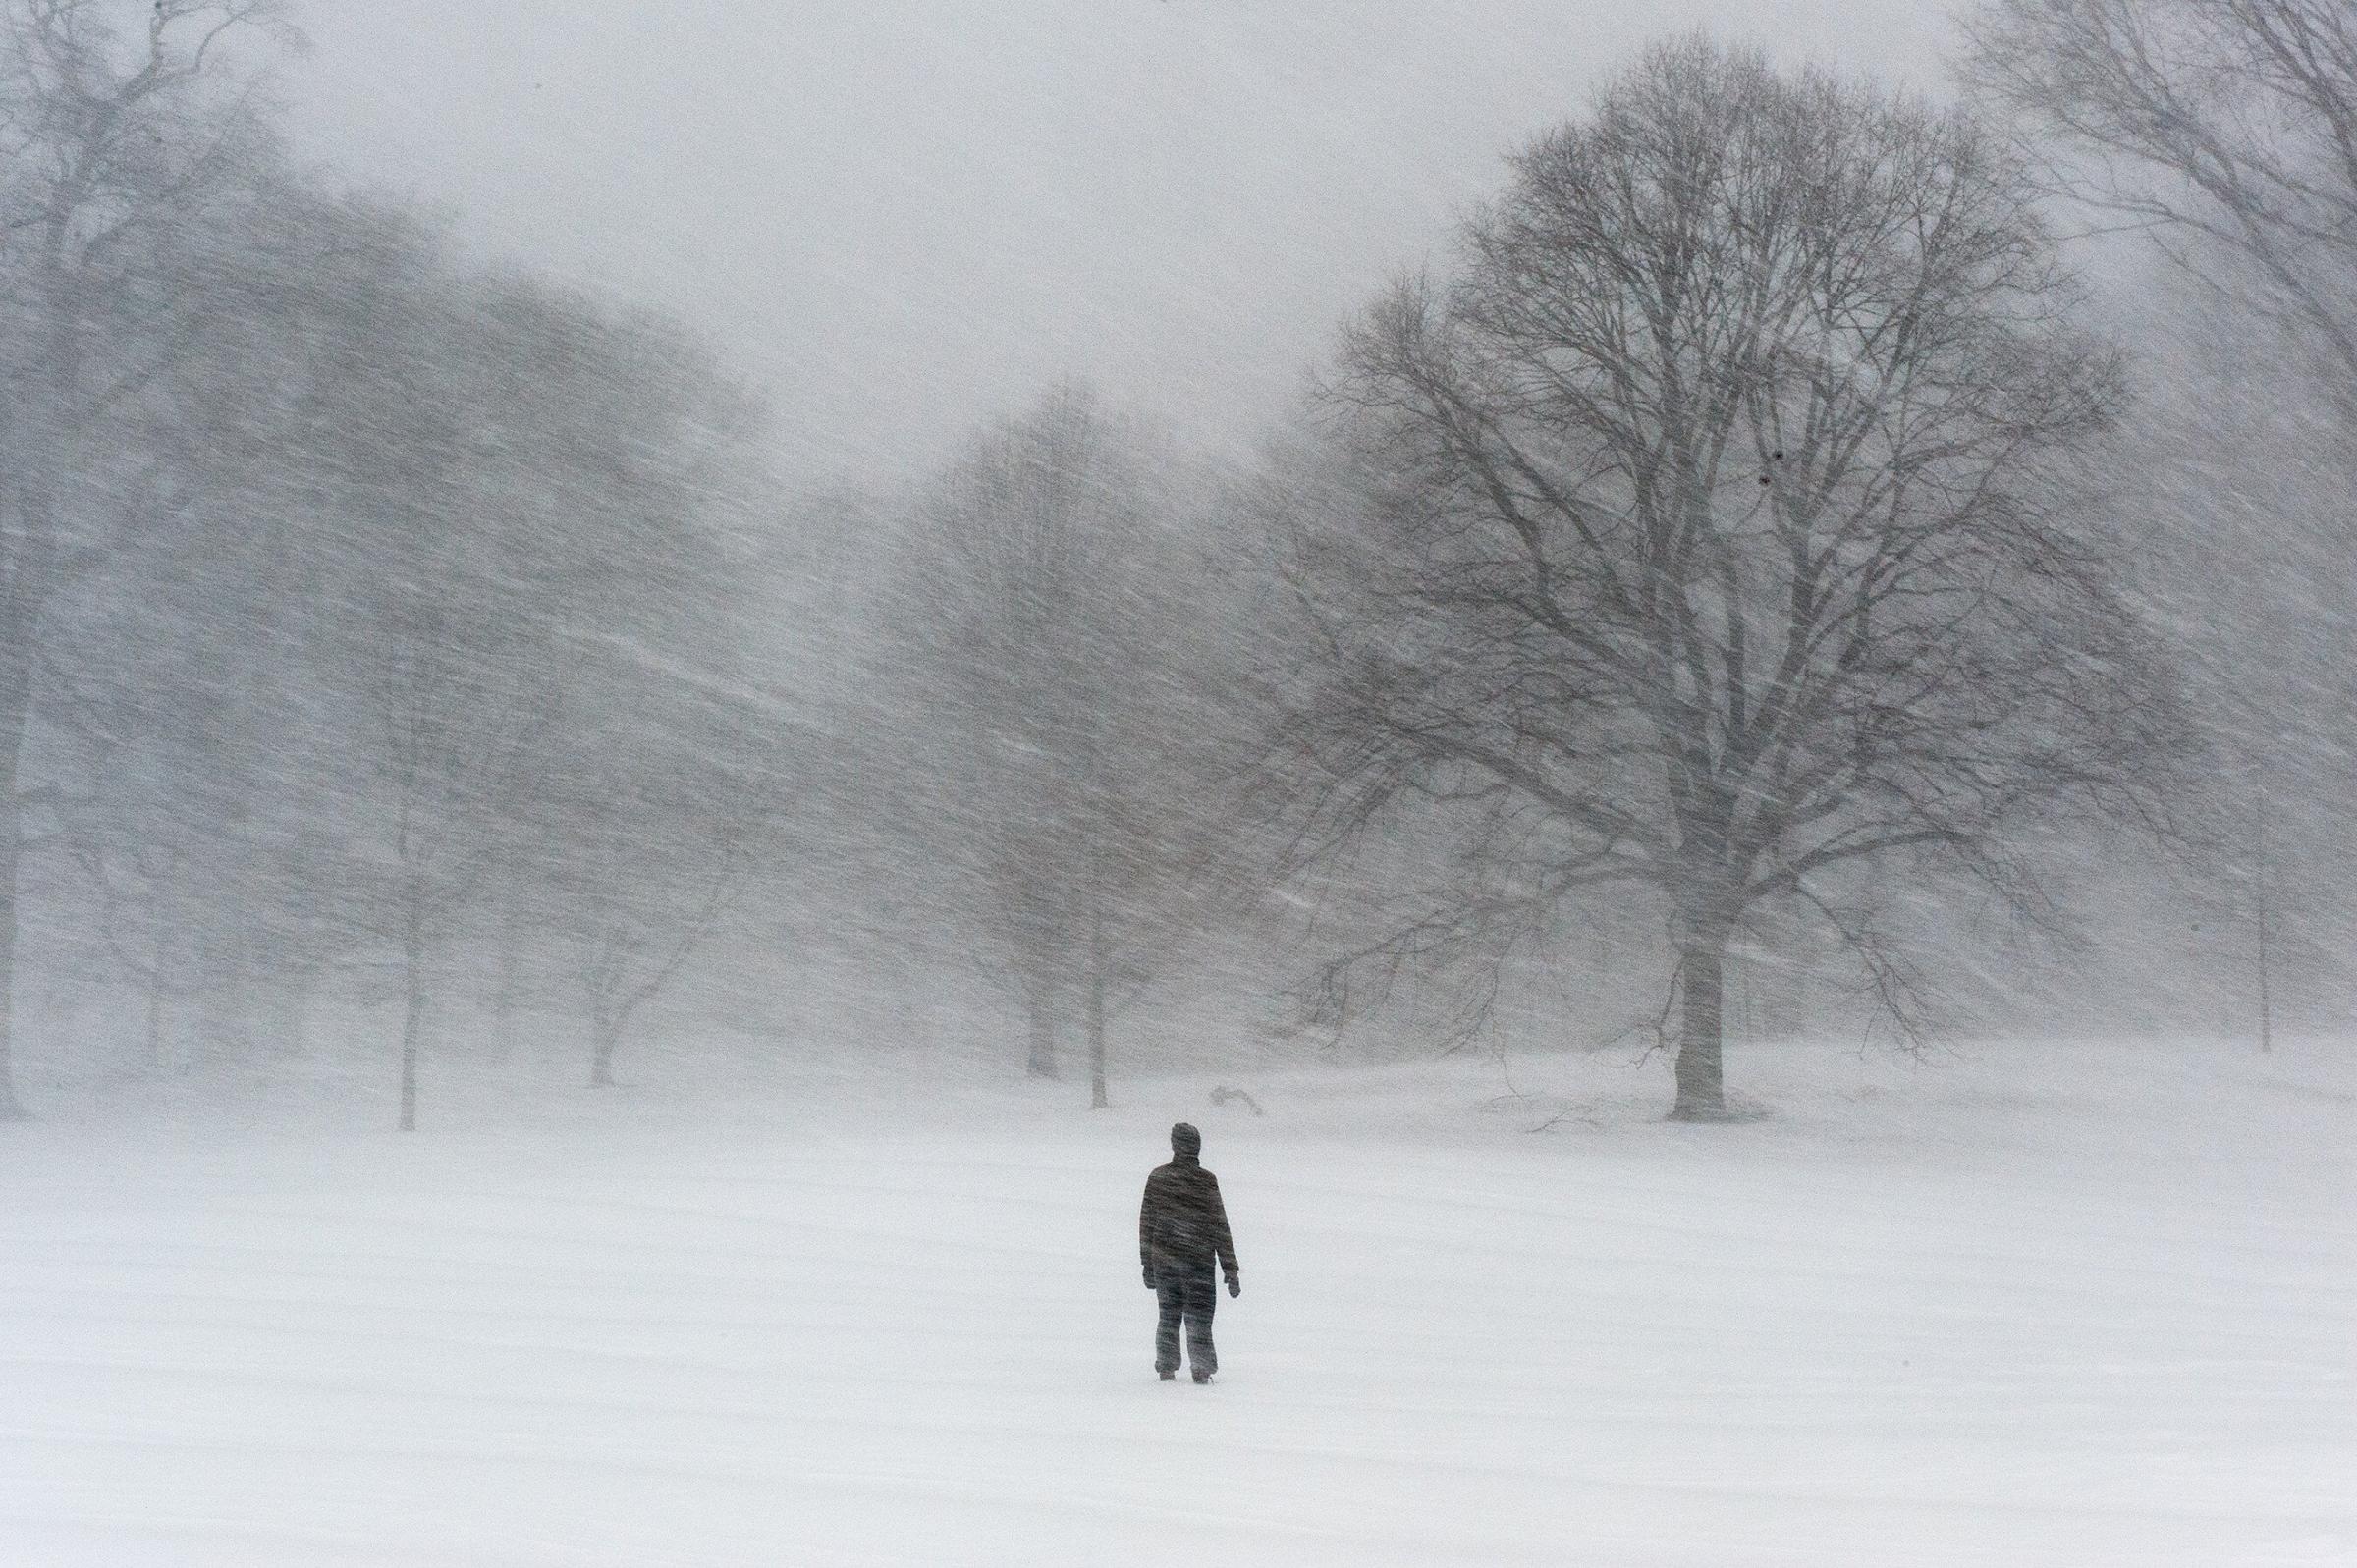 Braving the snow at Prospect Park in New York.